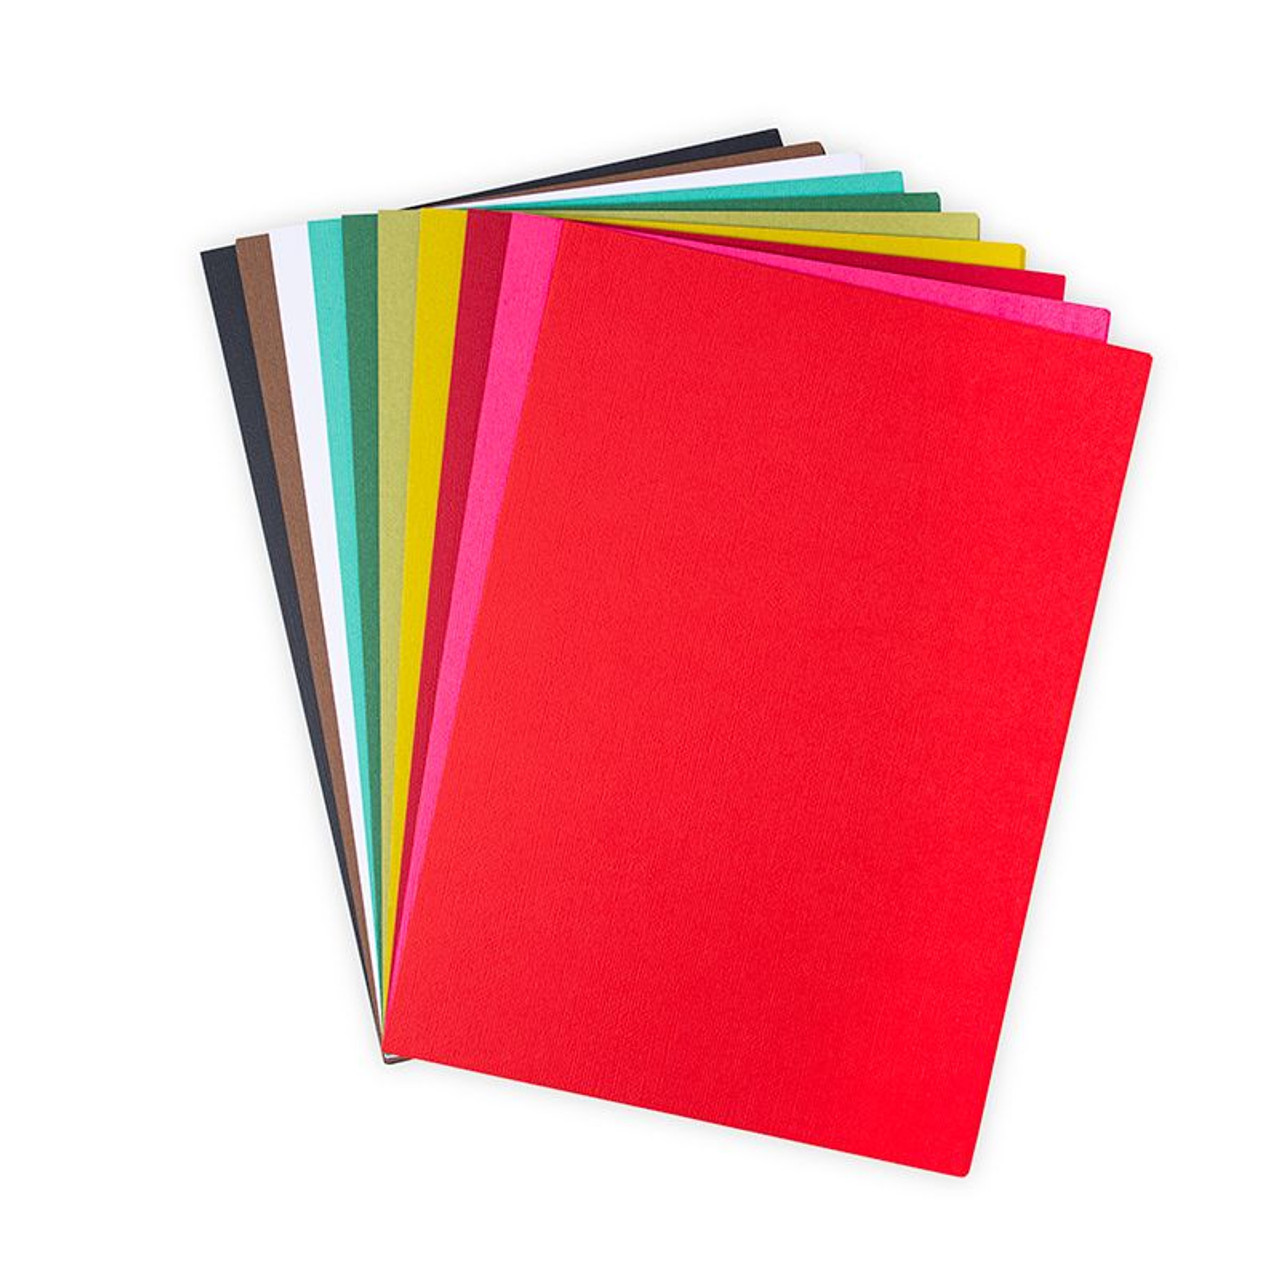 Sizzix Surfacez, Colored Cardstock 60PK - Festive - Scrapbooking Made Simple